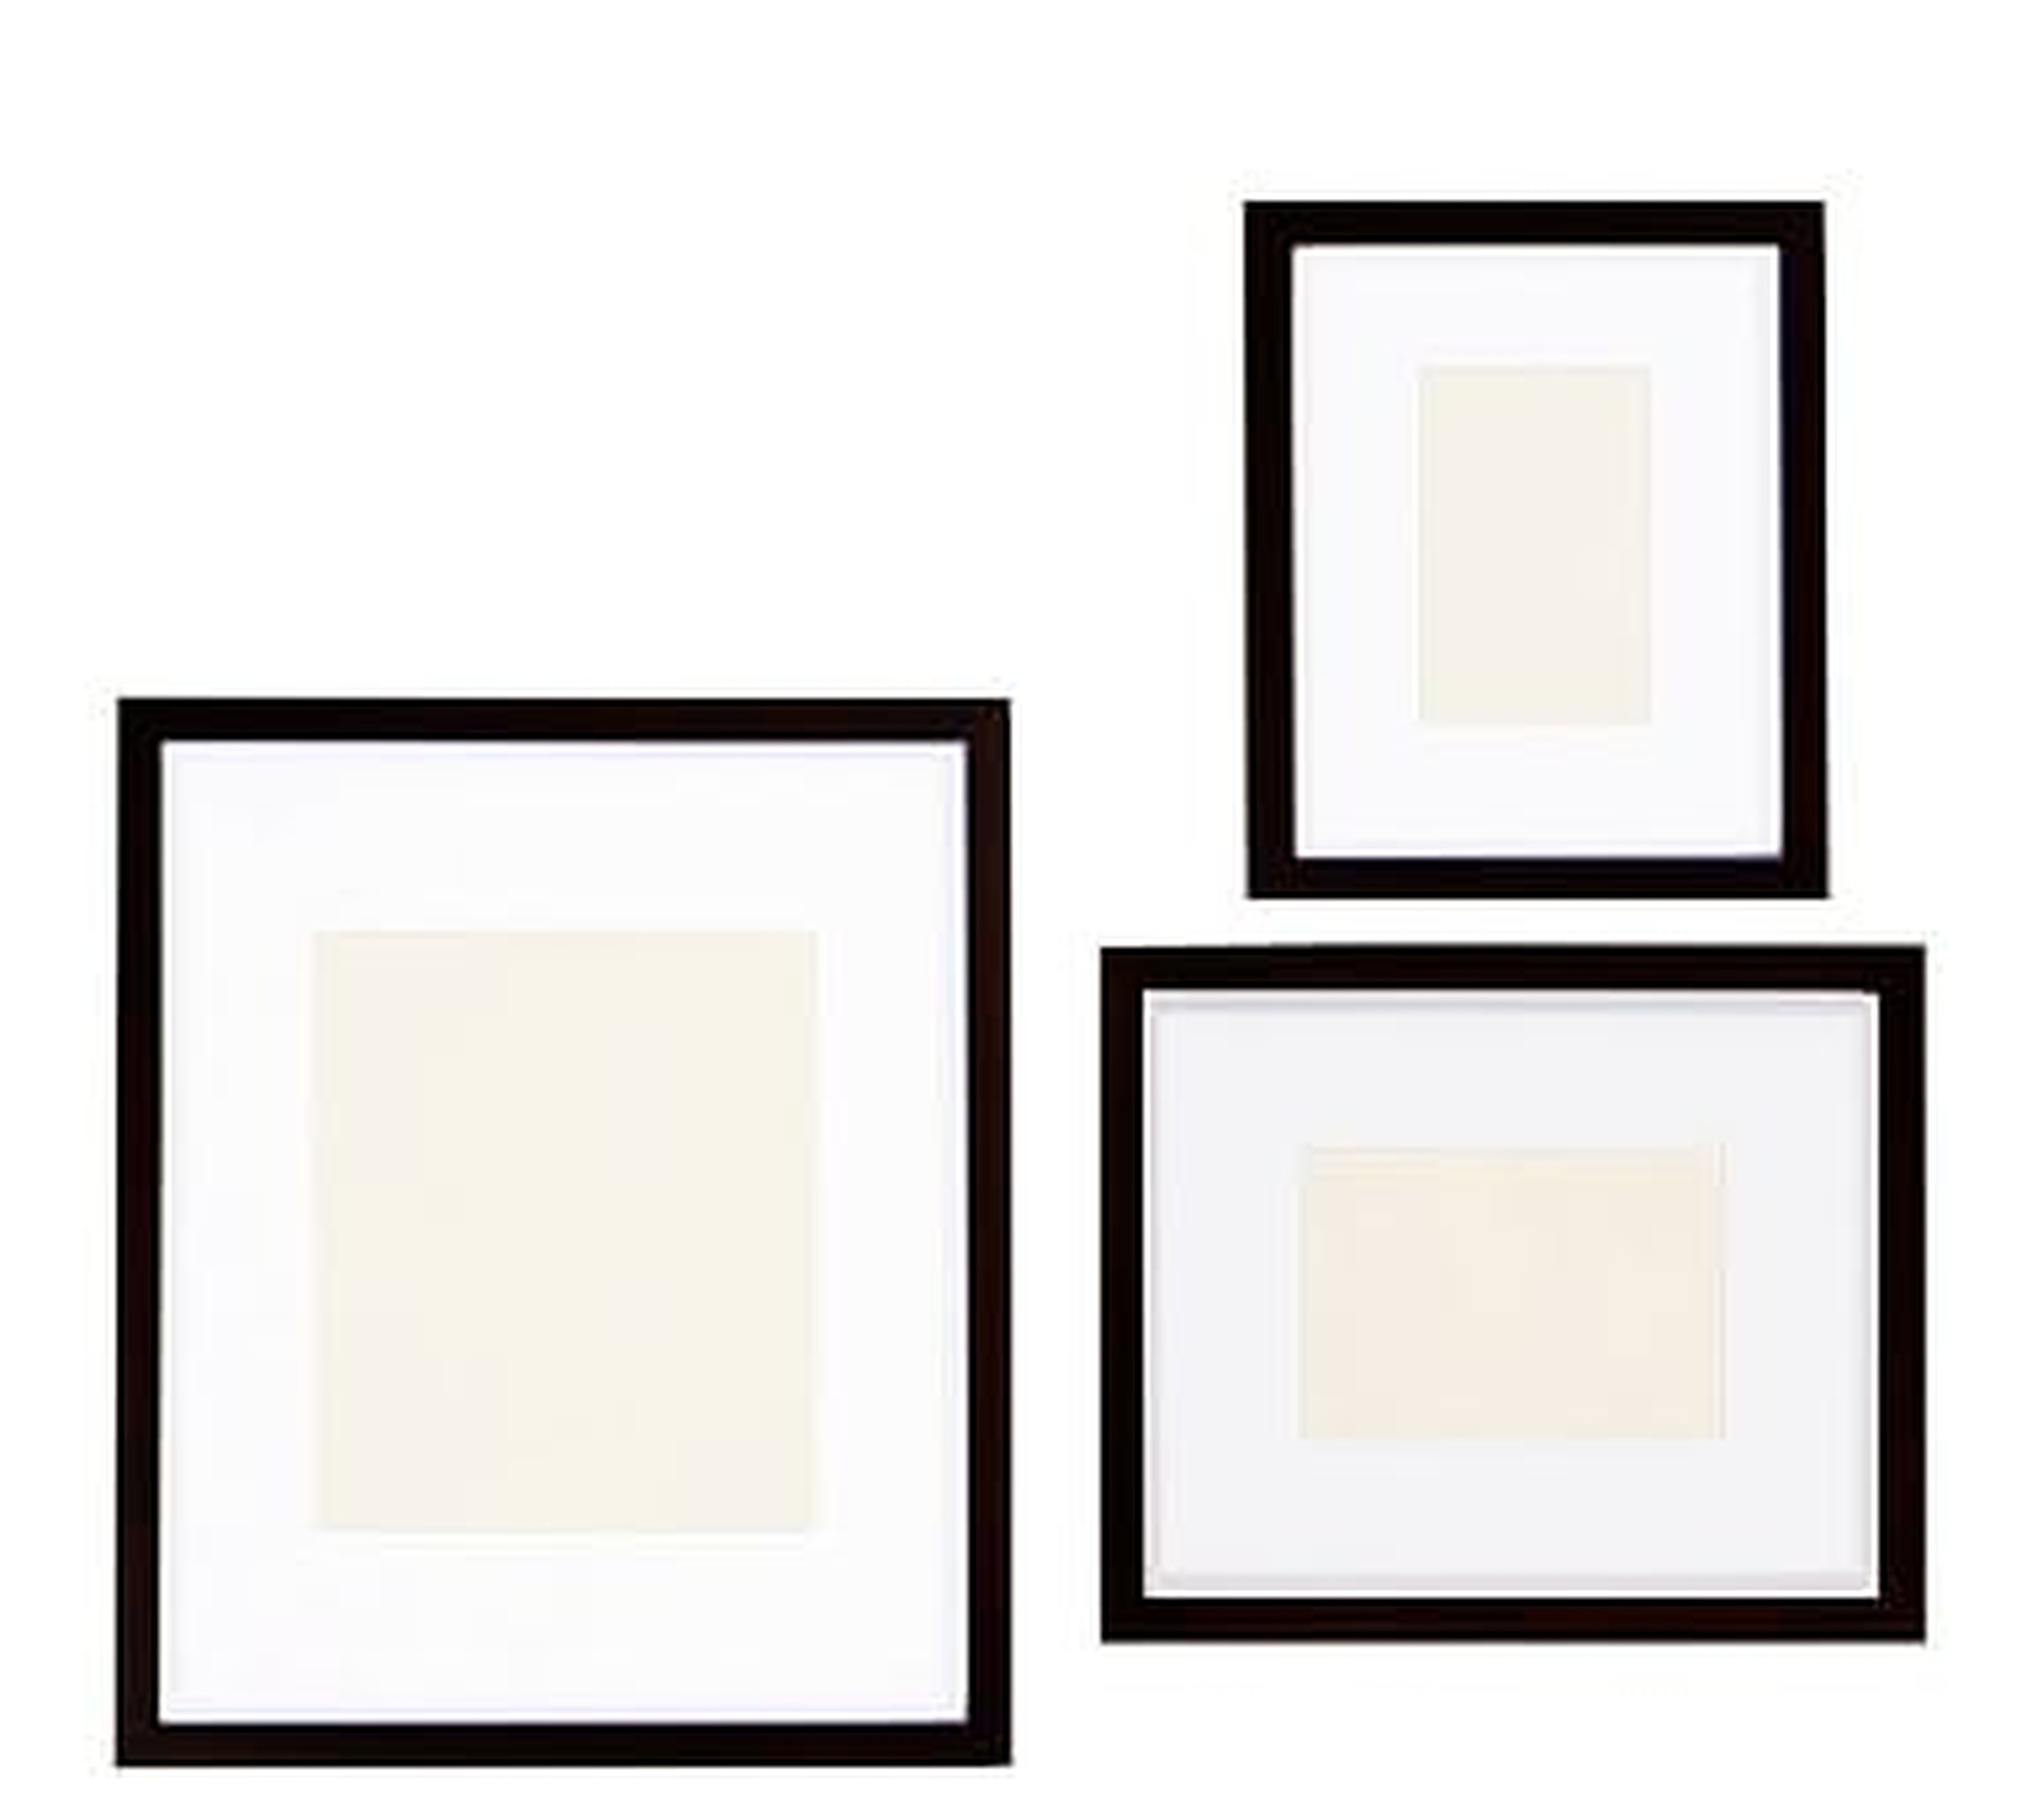 Wood Gallery Single Opening Frame, Set of 3 - Black (4 x 6, 5 x 7, 8 x 10) - Pottery Barn